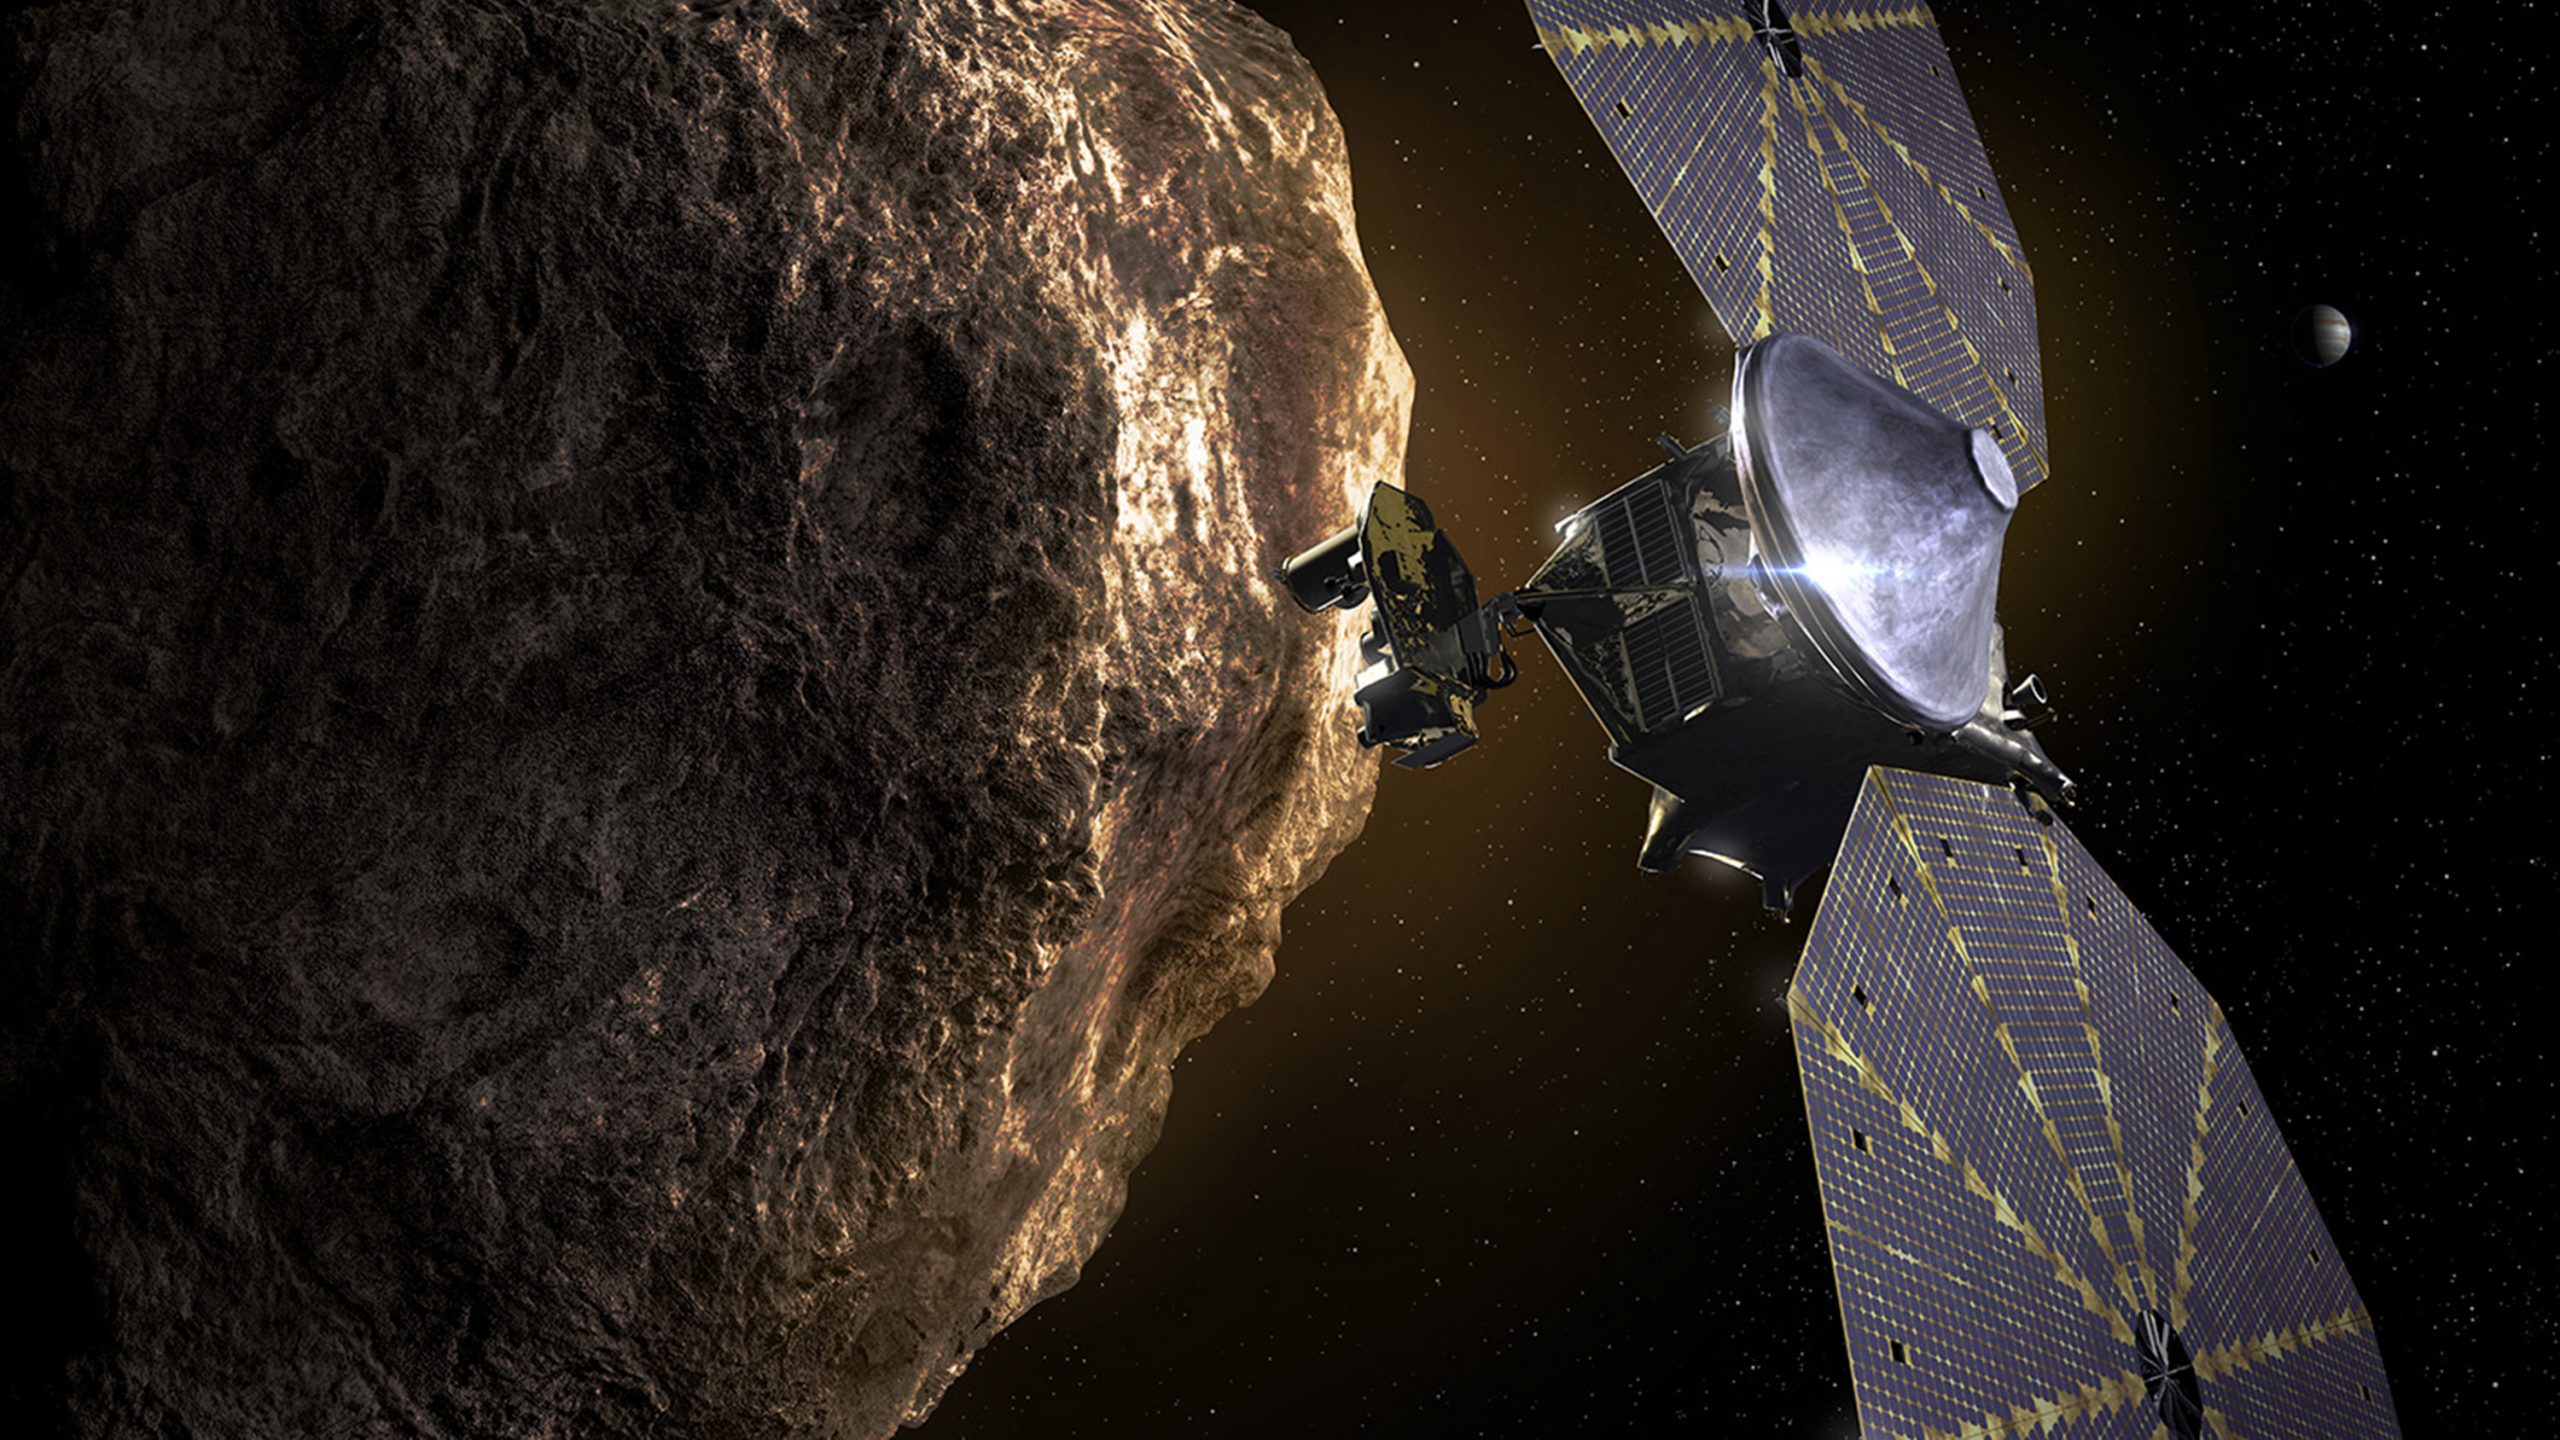 NASA launched the Lucy spacecraft which will study eight Trojan asteroids. Credit: NASA